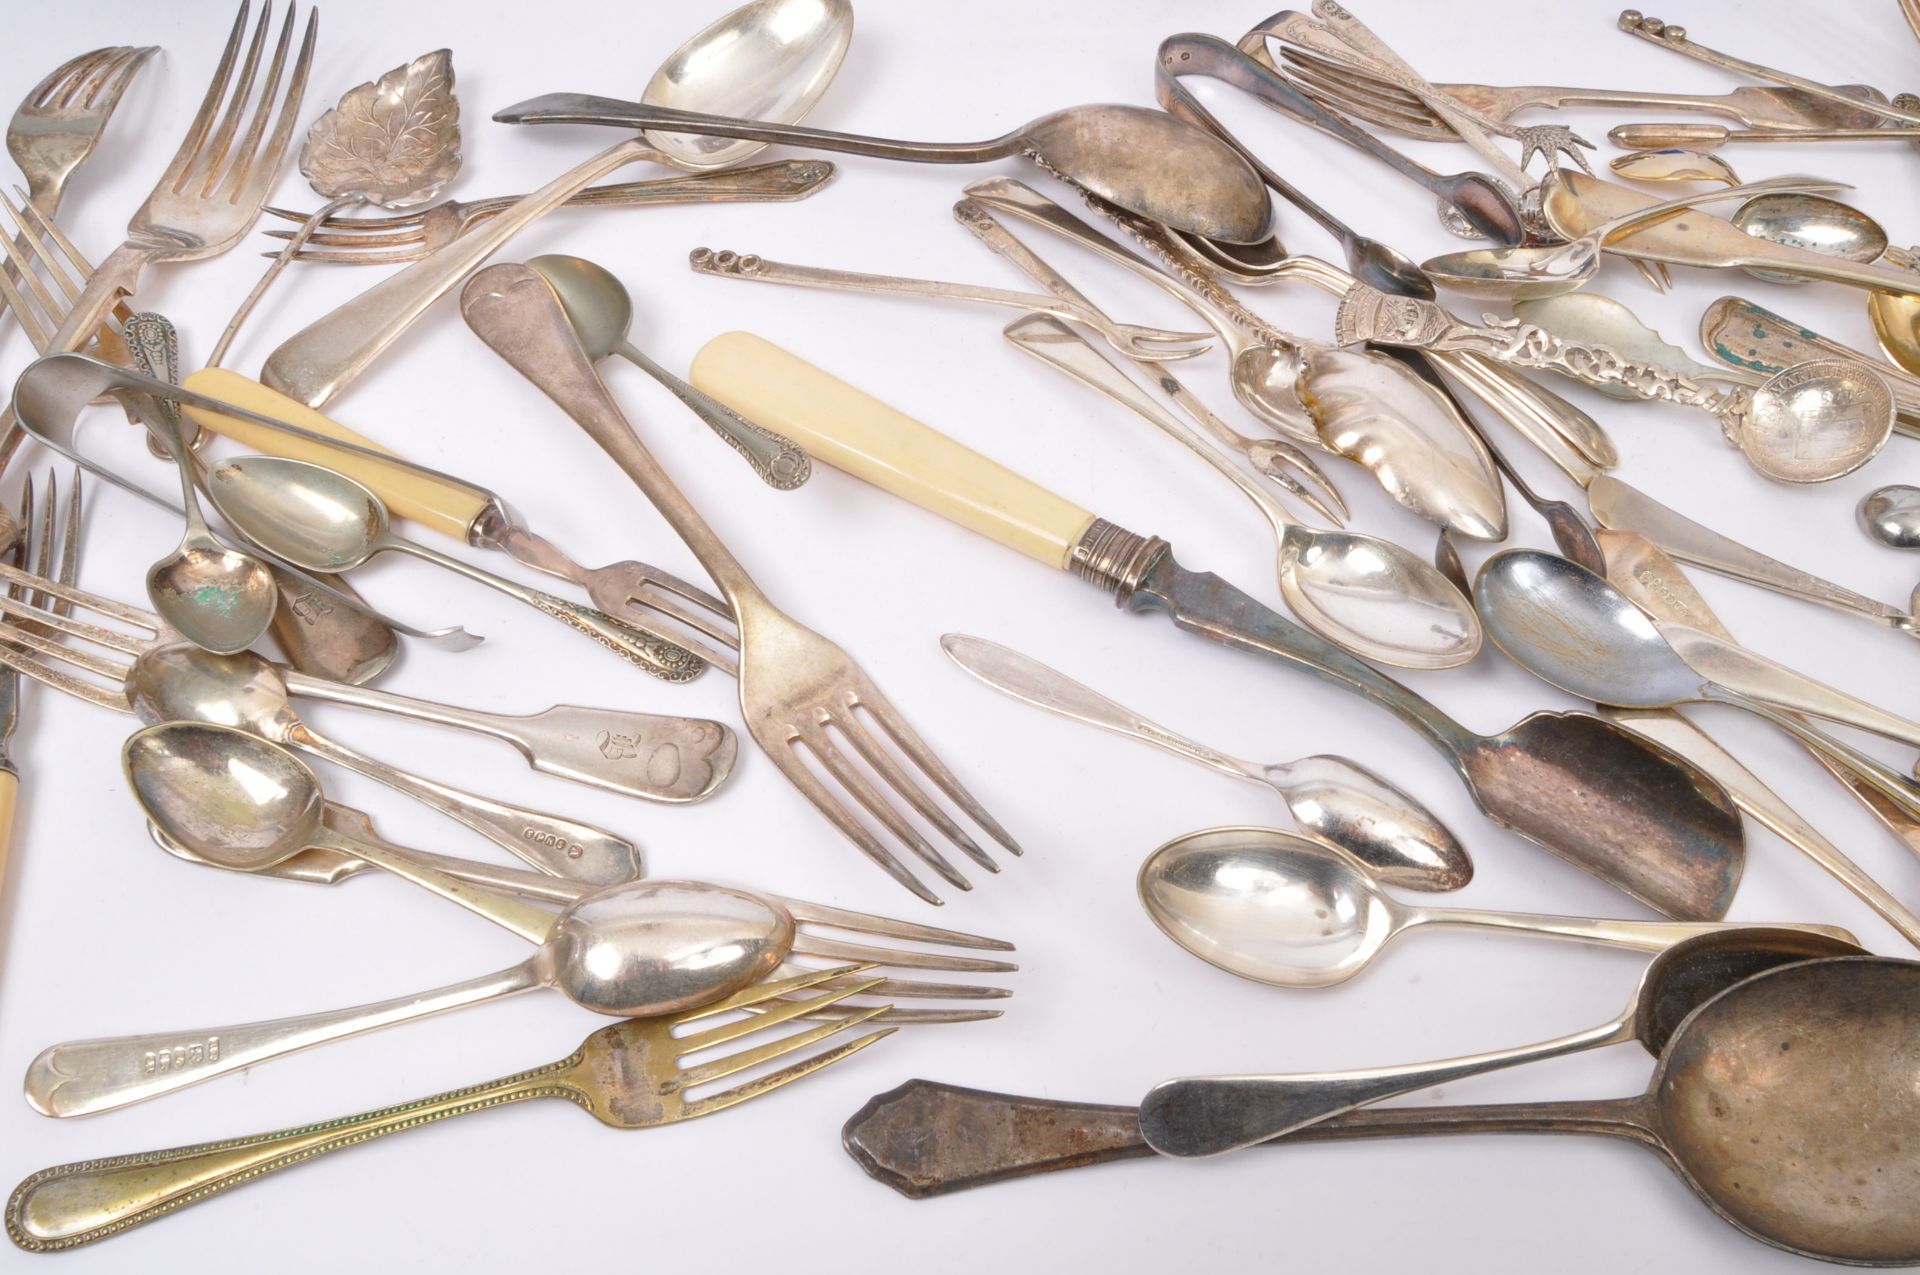 ASSORTMENT OF VINTAGE 20TH CENTURY SILVER PLATE CUTLERY - Image 6 of 6